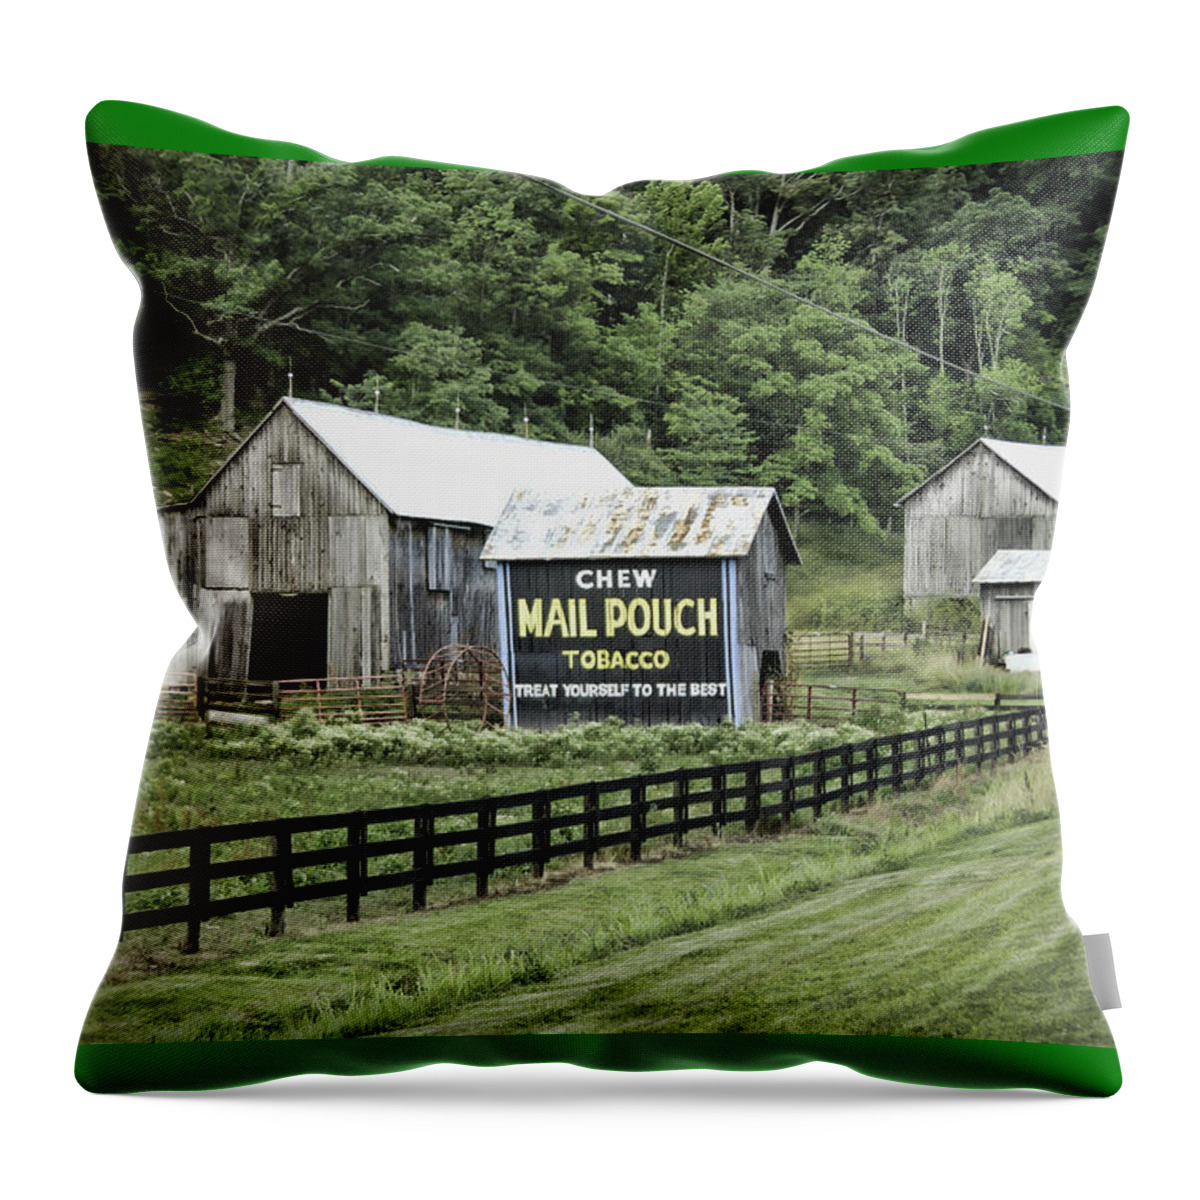 Mail Pouch Tobacco Barn Throw Pillow featuring the photograph Mail Pouch Tobacco Barn by Phyllis Taylor